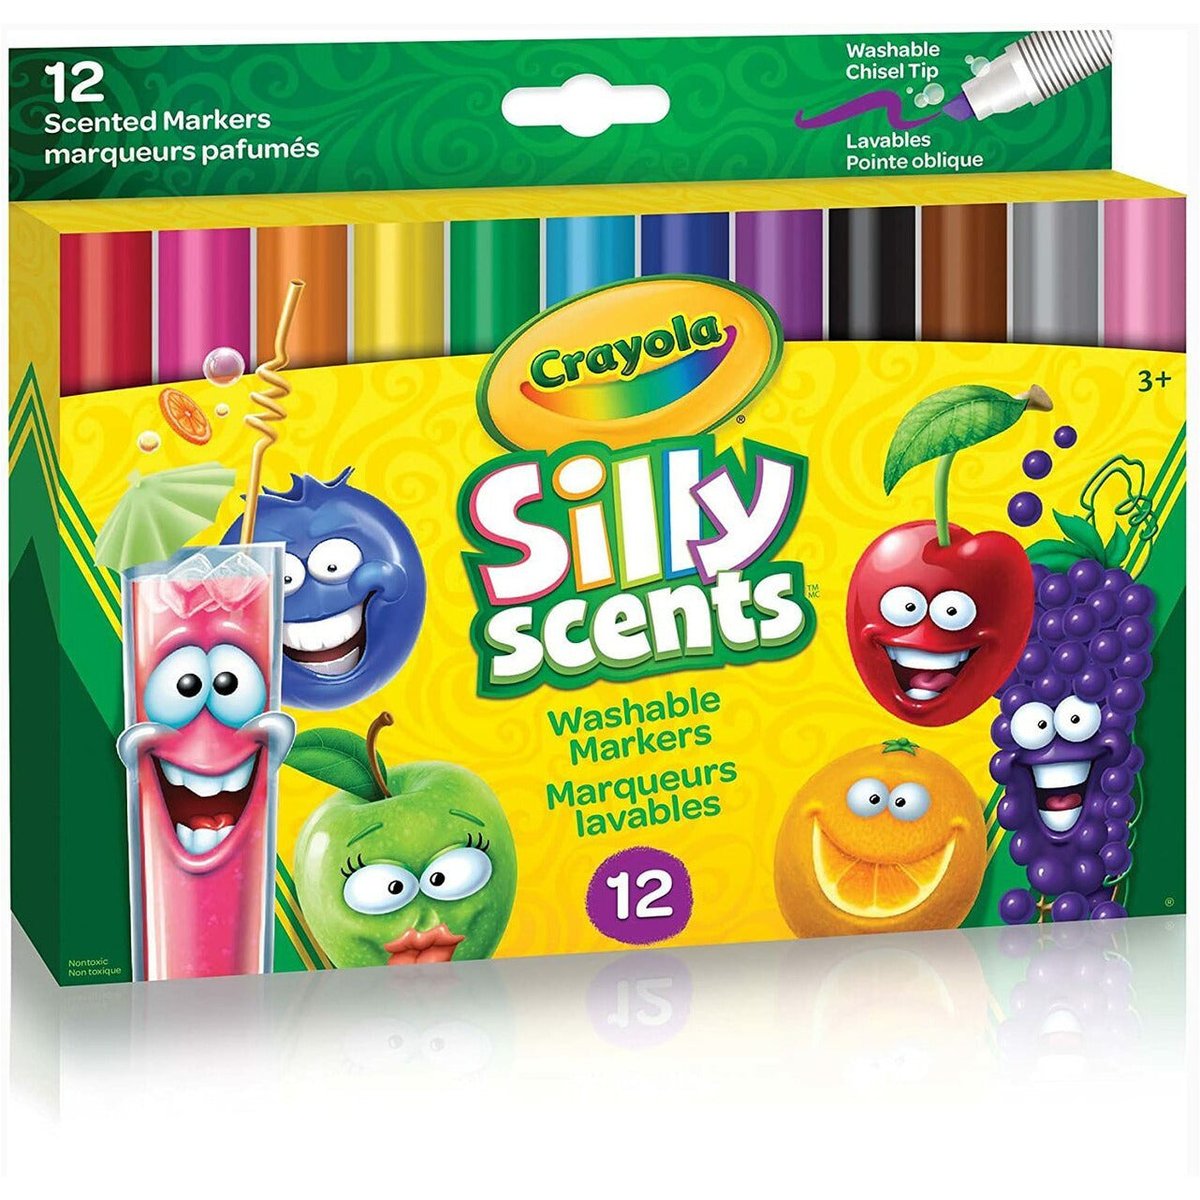 https://images.verishop.com/crayola-crayola-silly-scents-wedge-tip-markers-12-count/M00063652826206-524997044?auto=format&cs=strip&fit=max&w=1200